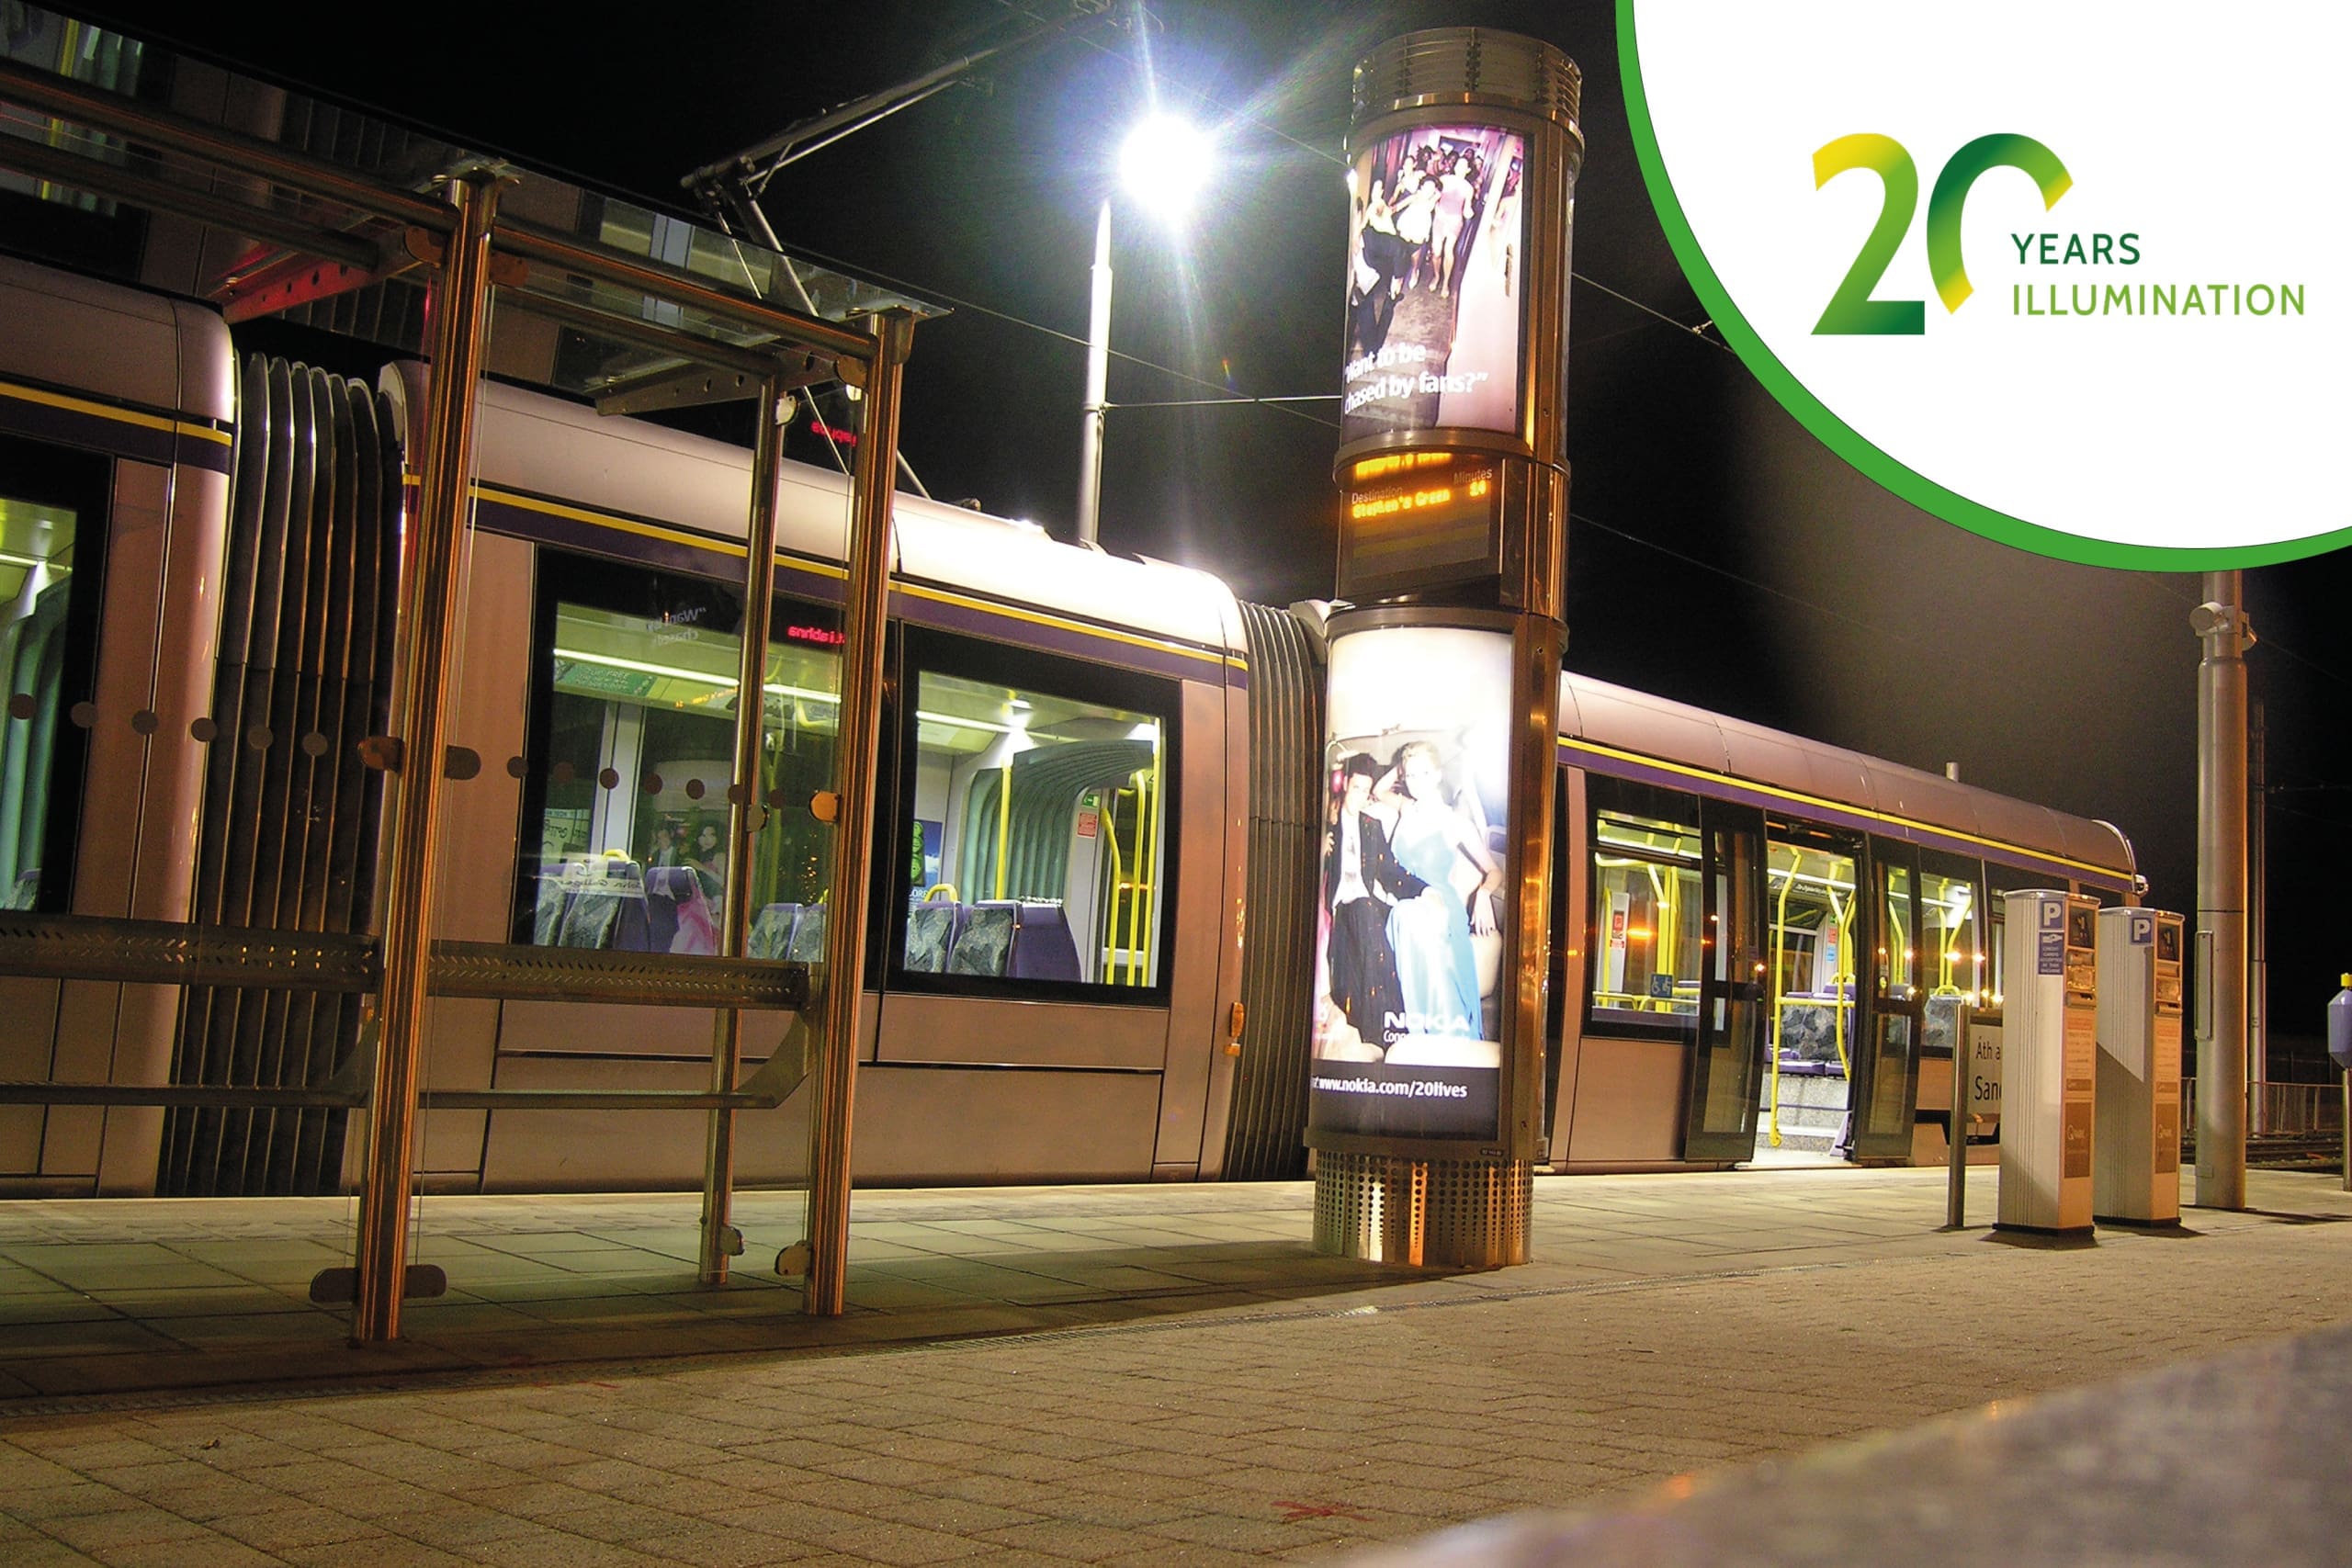 A tram is stopped at a well-lit station at night, where digital screens with LED backlit graphics display advertisements. A logo in the upper right corner reads "20 Years of Illumination" in green text.